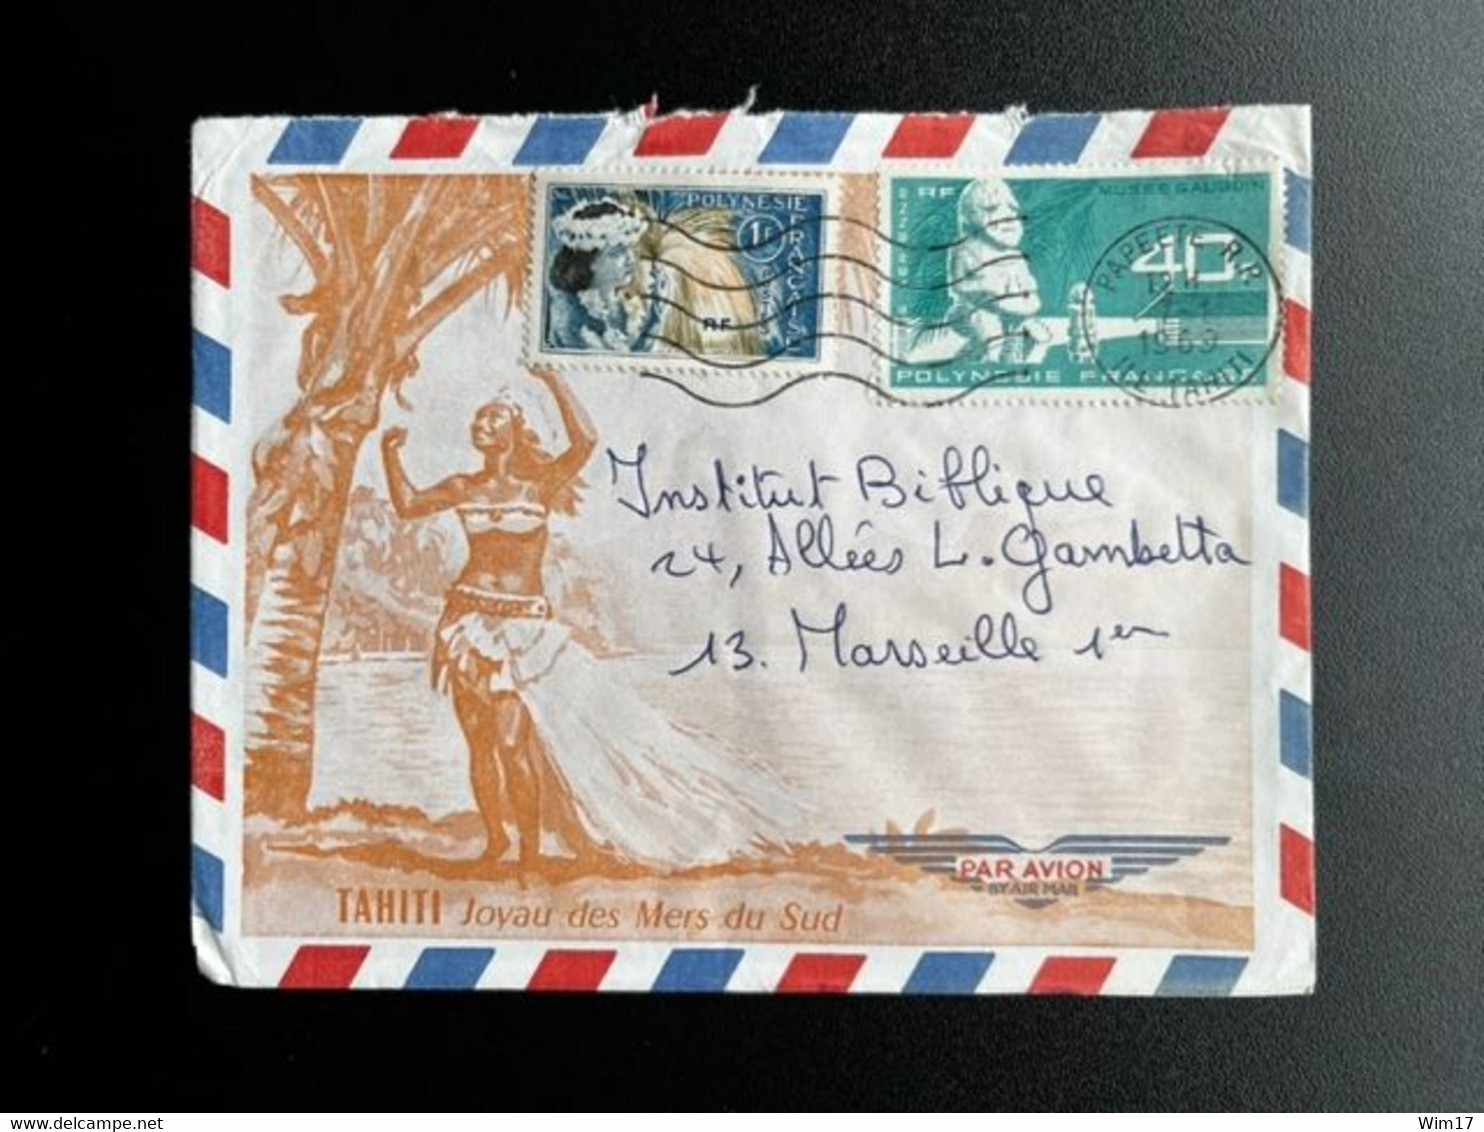 FRENCH POLYNESIA 1969 AIR MAIL LETTER PAPEETE TO MARSEILLE 12-02-1969 POLYNESIE LETTRE - Covers & Documents